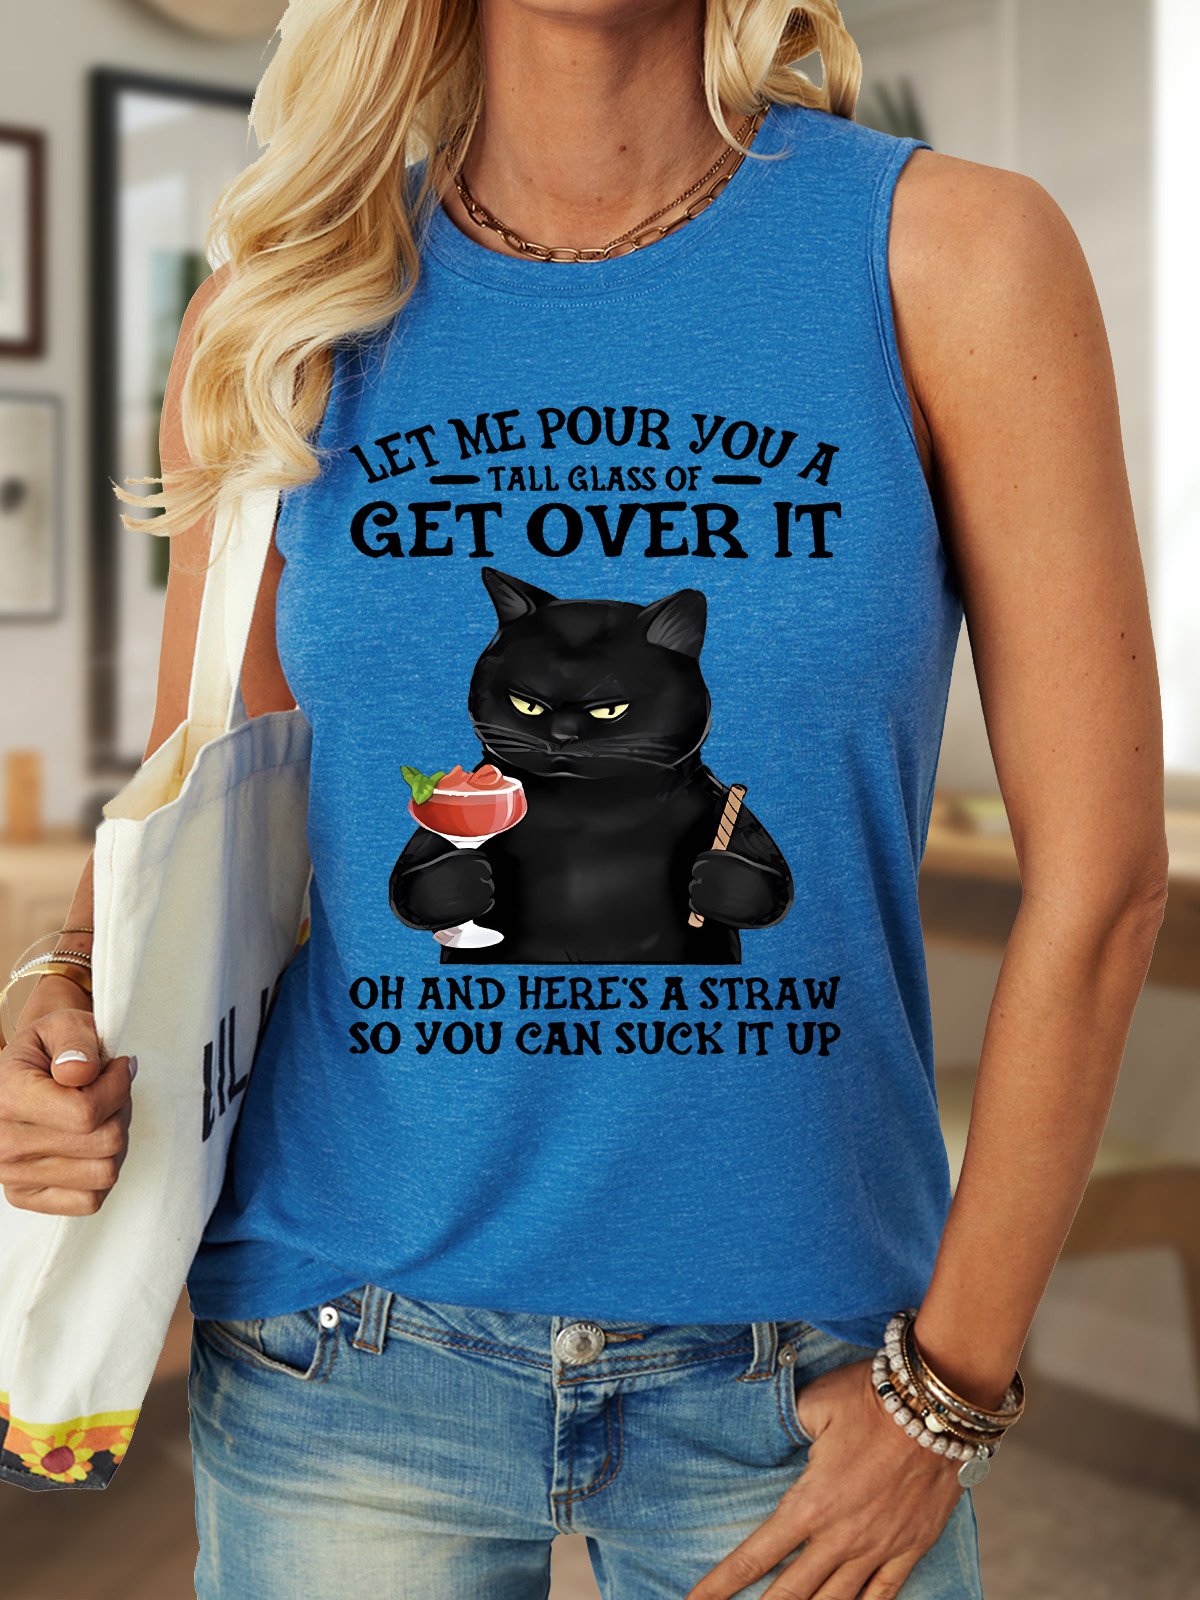 Let Me Pour You A Tall Glass Of Get Over It Oh And Here’s A Straw So You Can Suck It Up Women's Crew Neck Tank Top